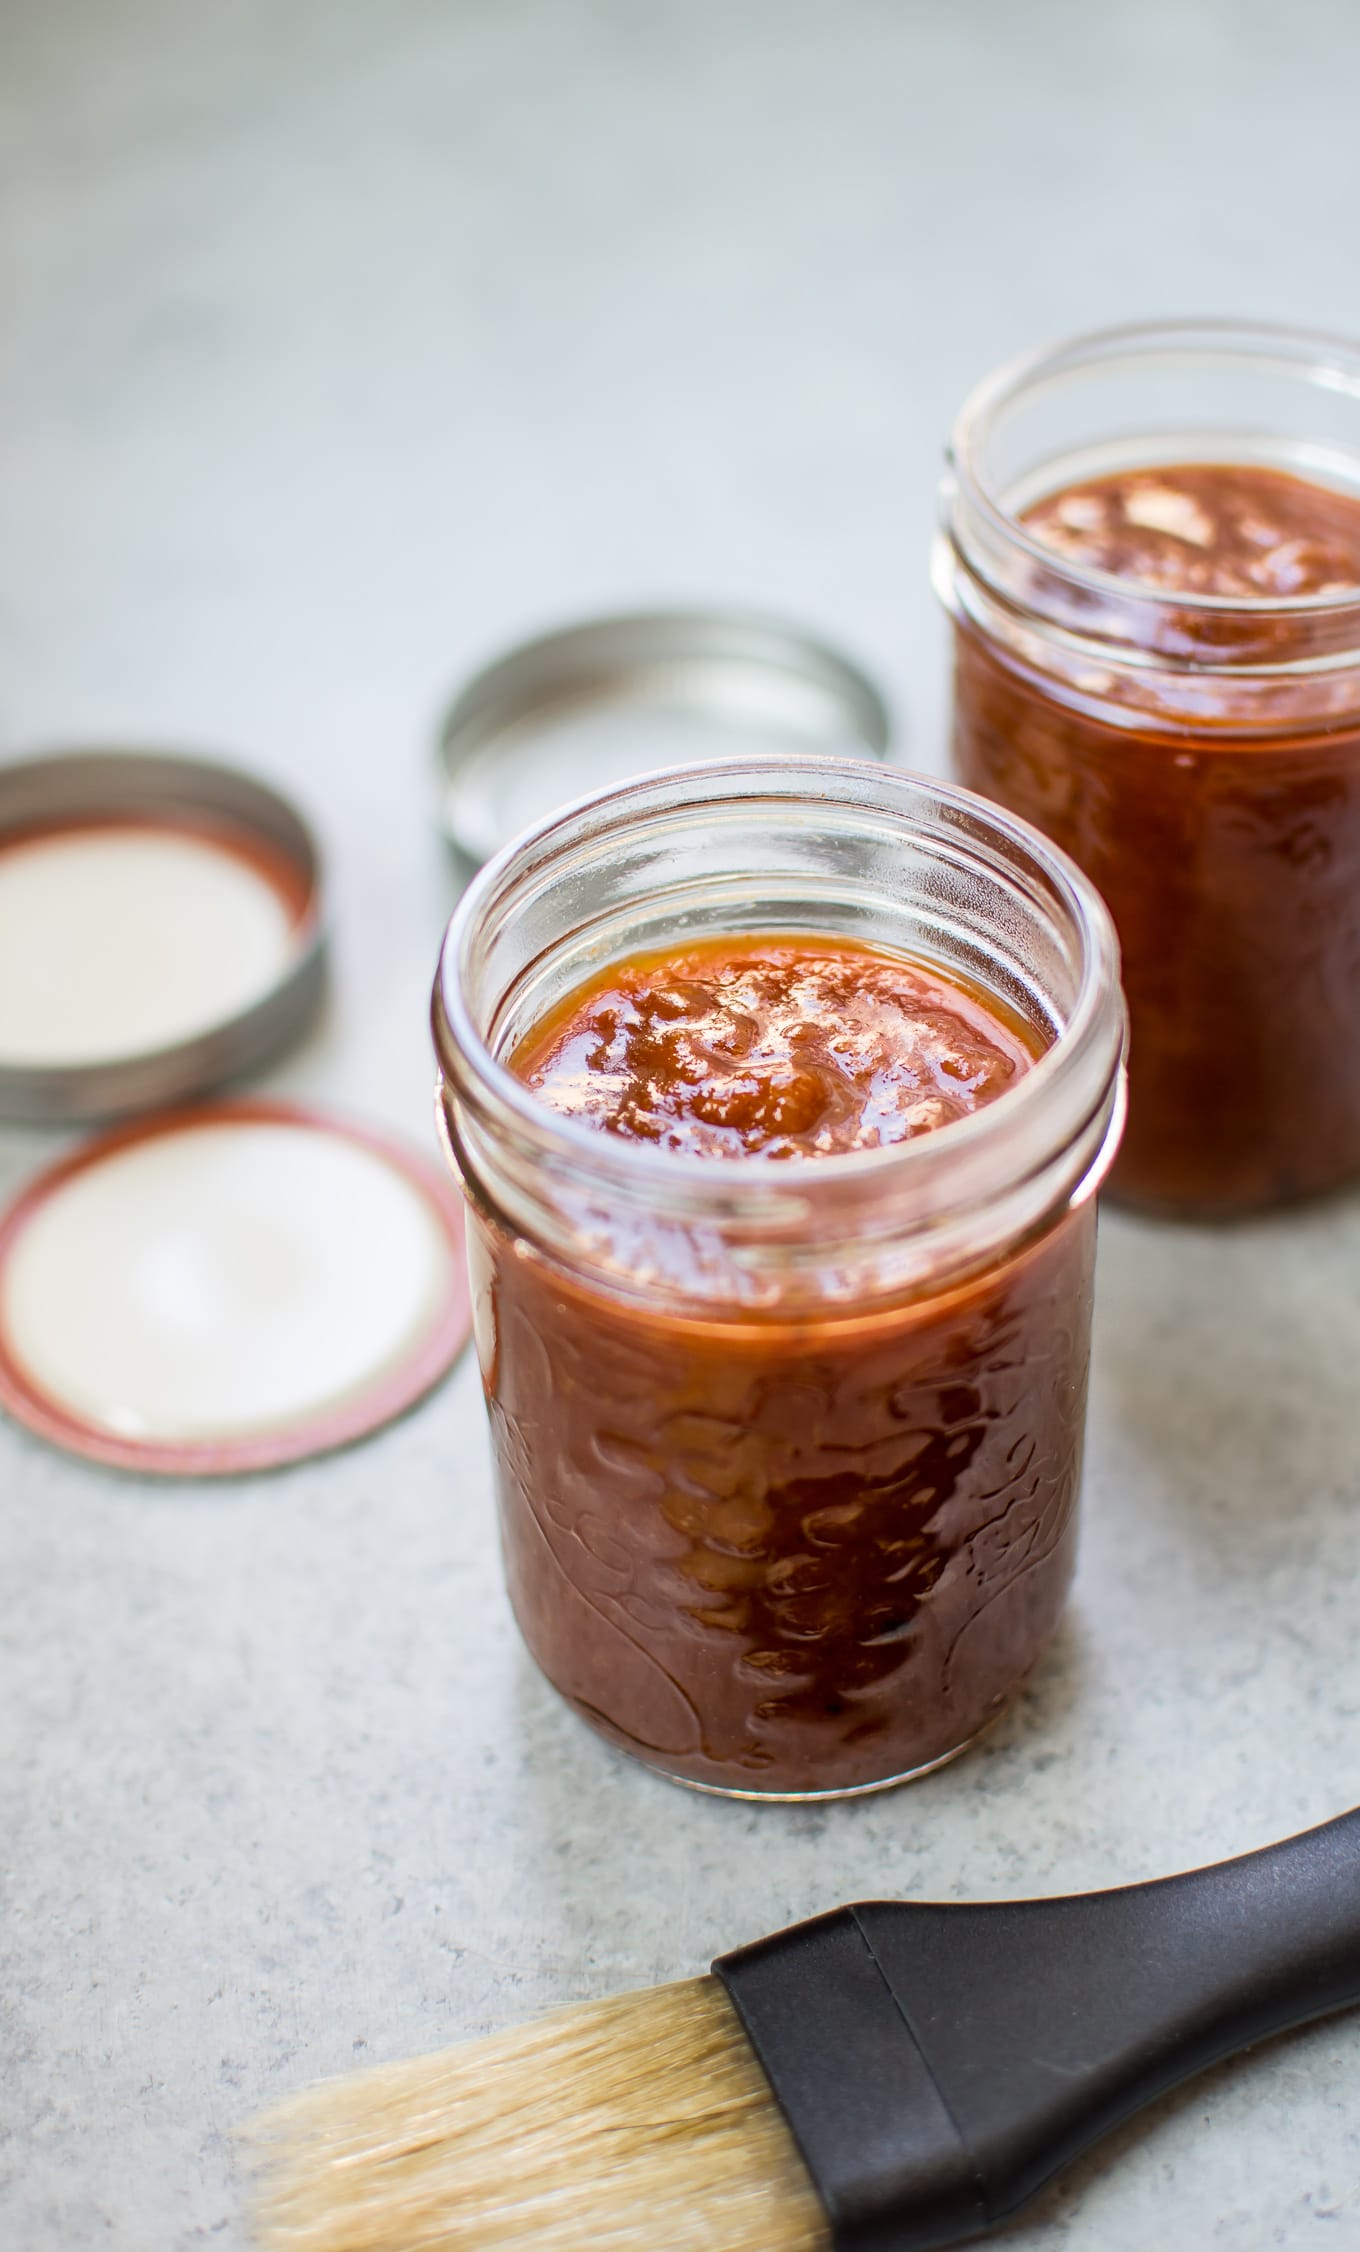 HOW TO MAKE APRICOT BBQ SAUCE: